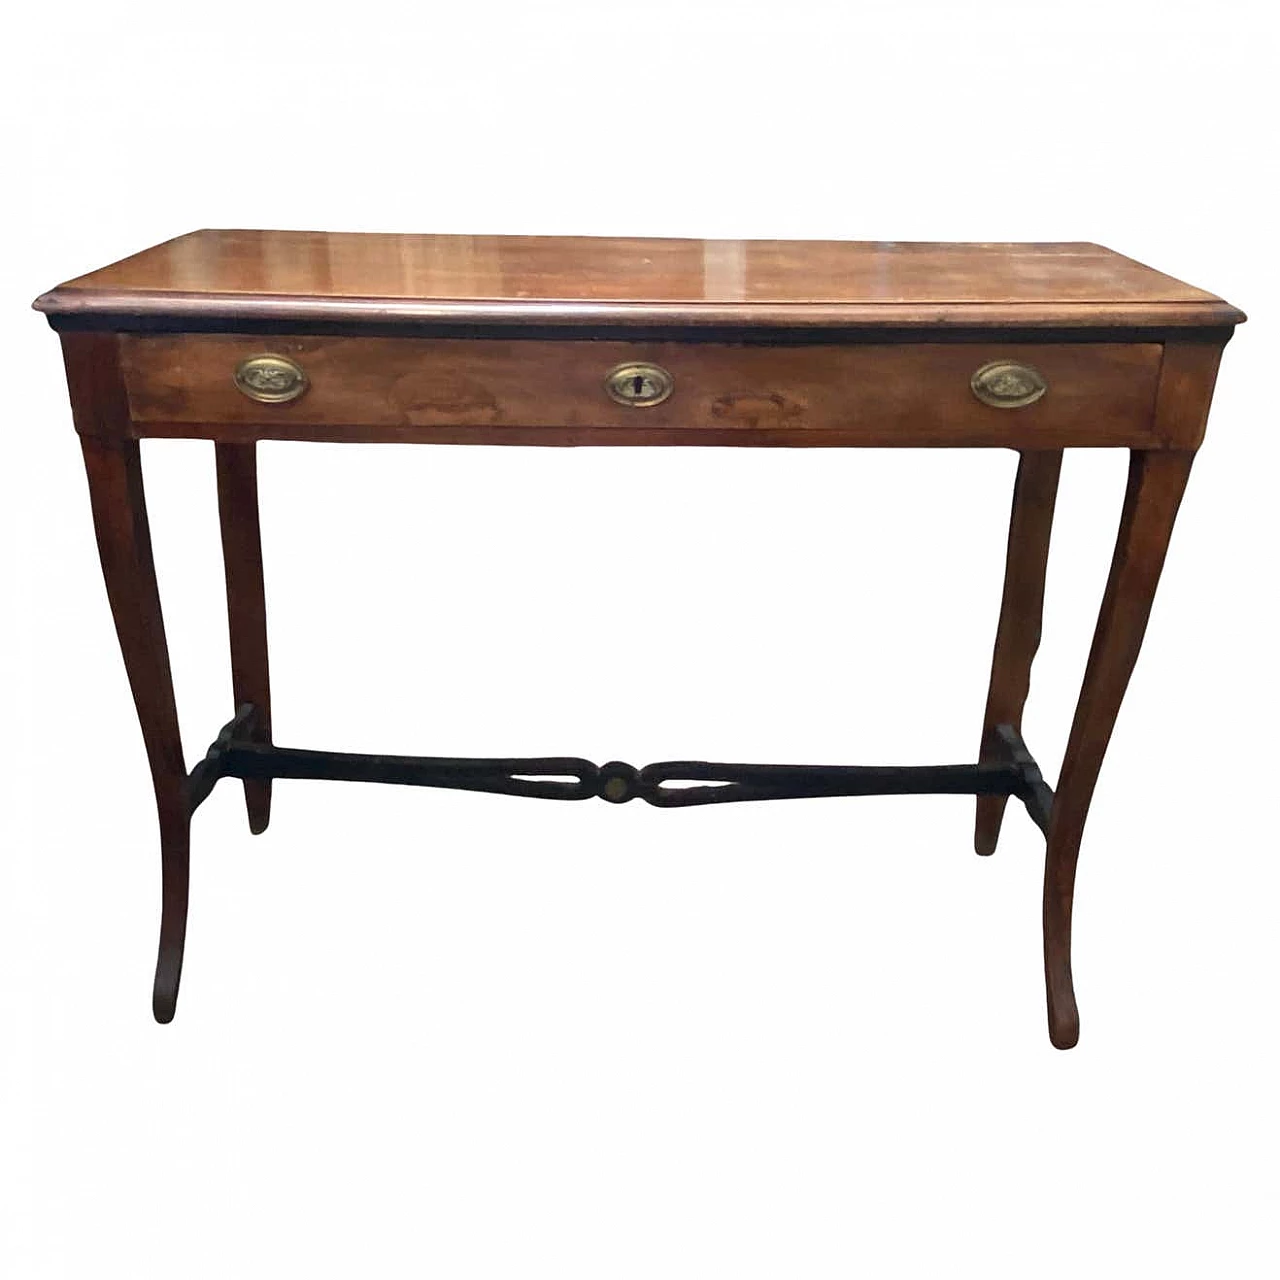 Empire console table in walnut with sabre feet, 19th century 1